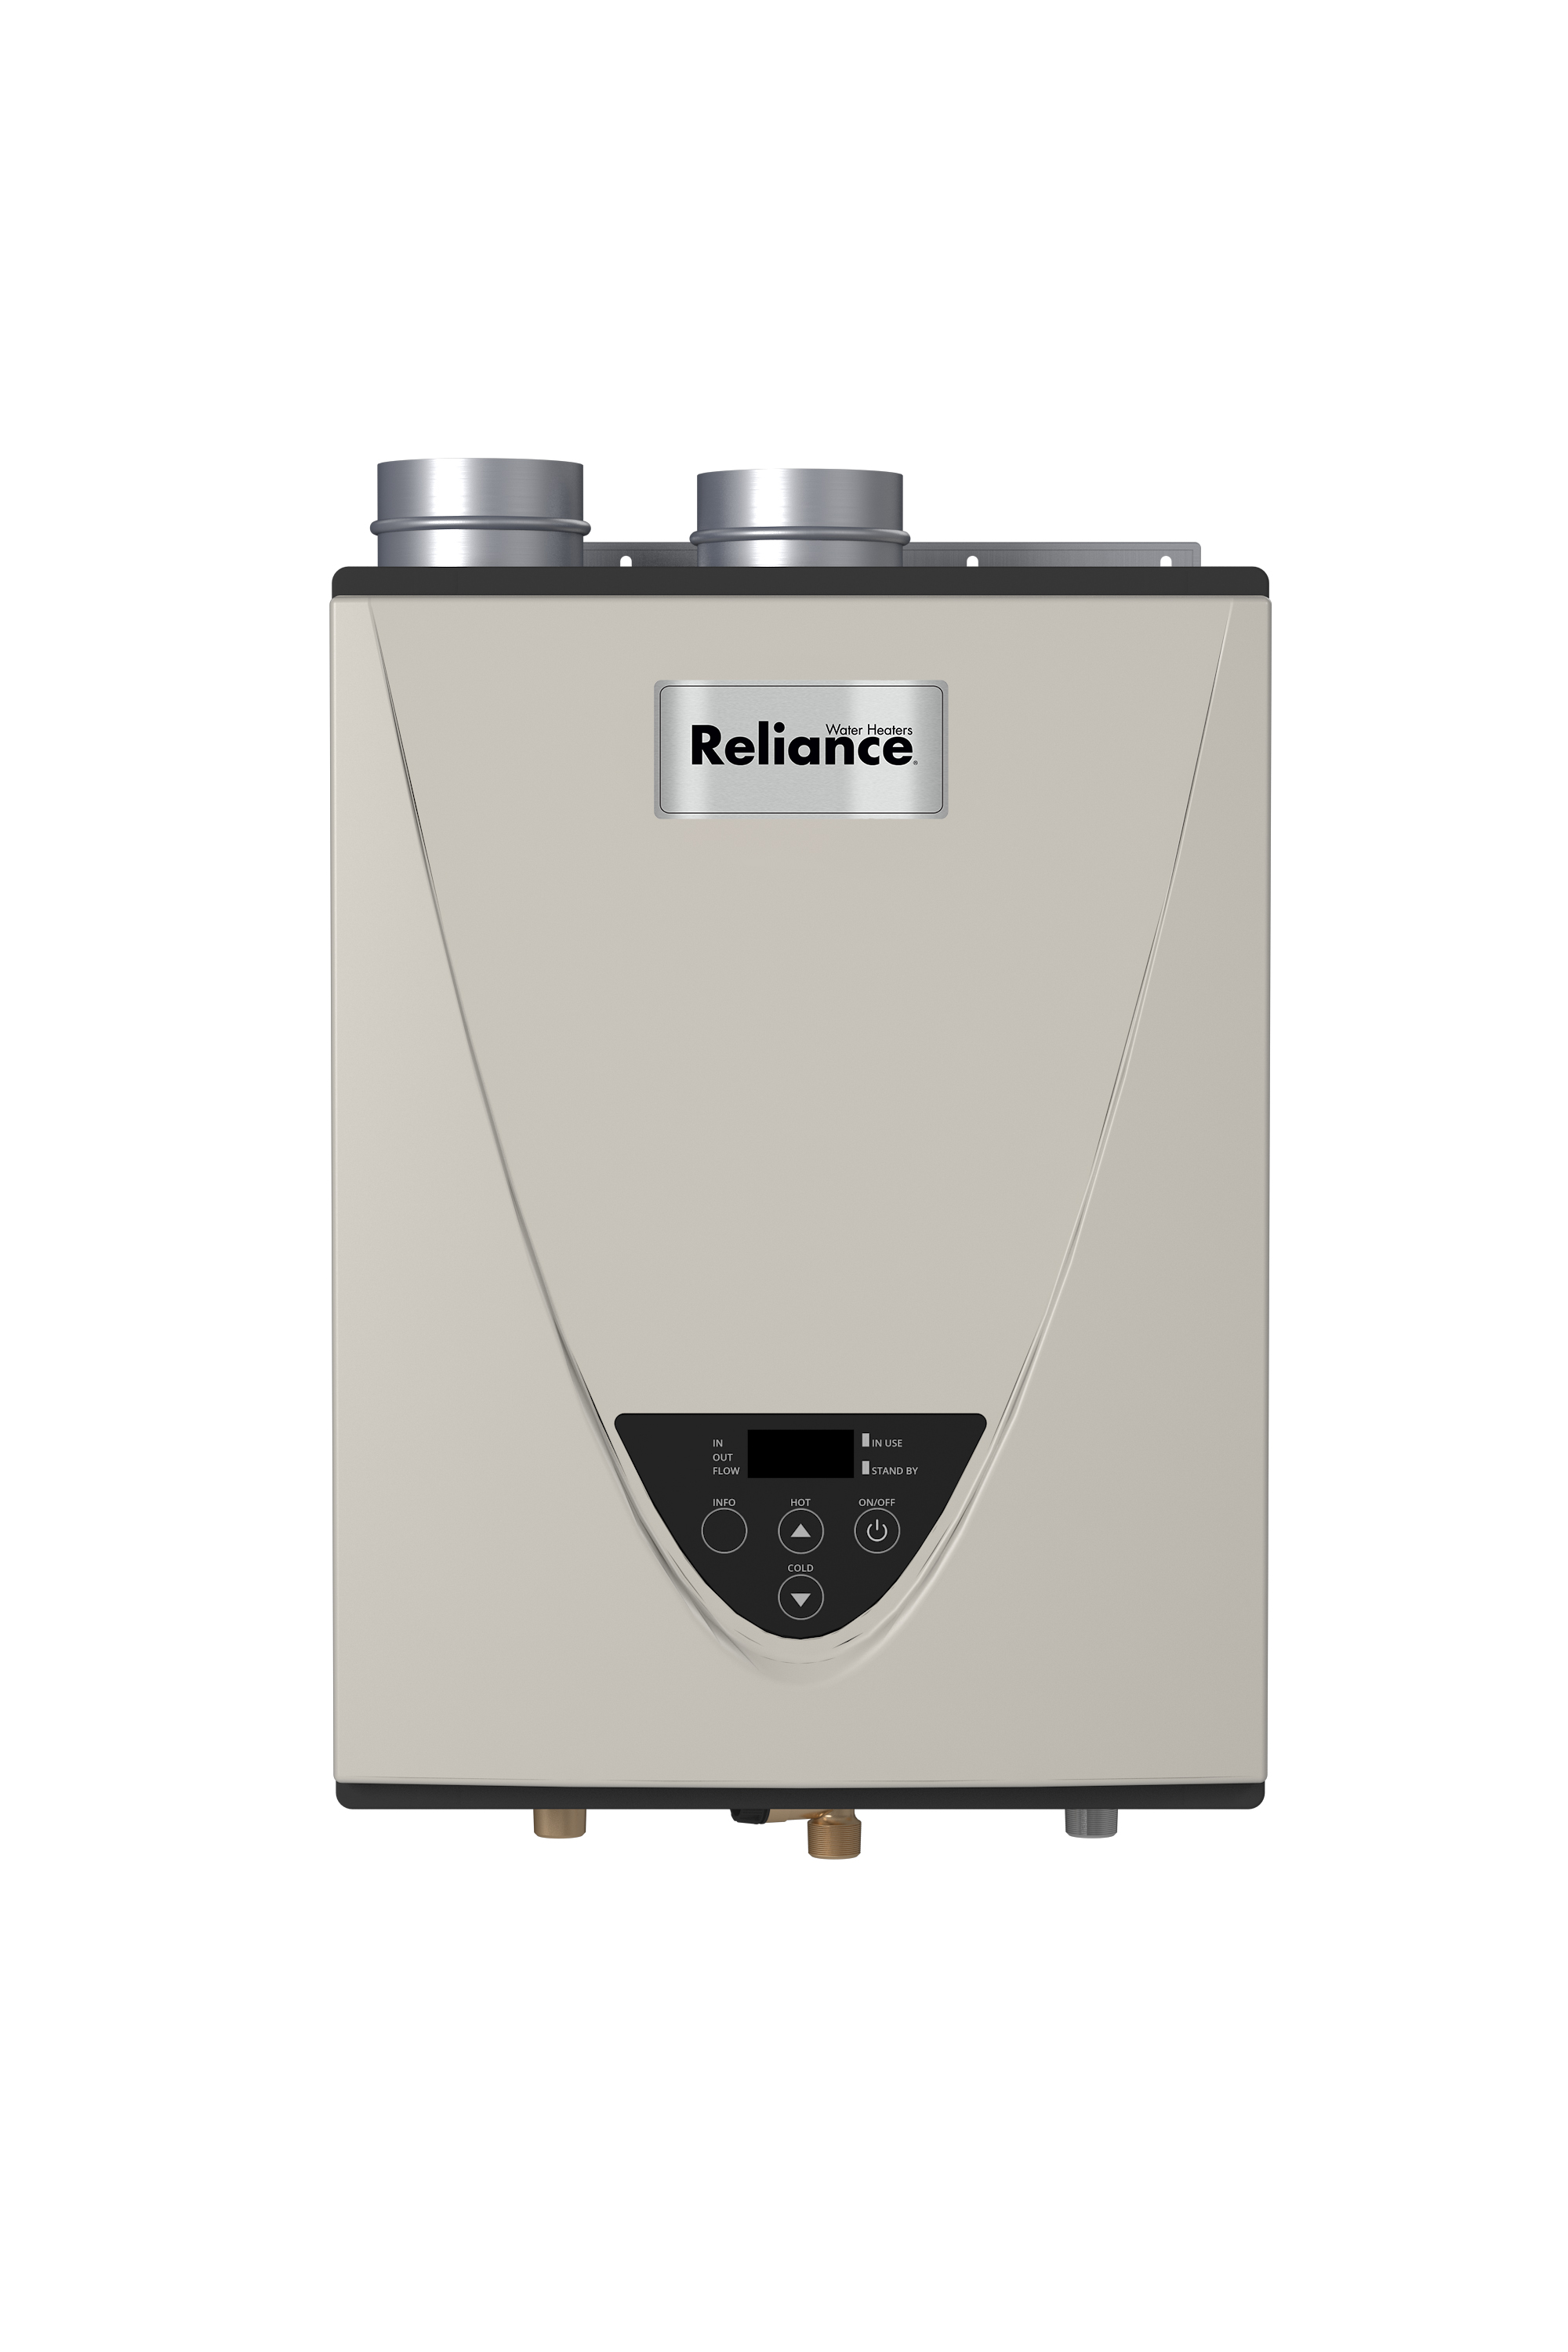 Where can you purchase a Reliance hot water tank?